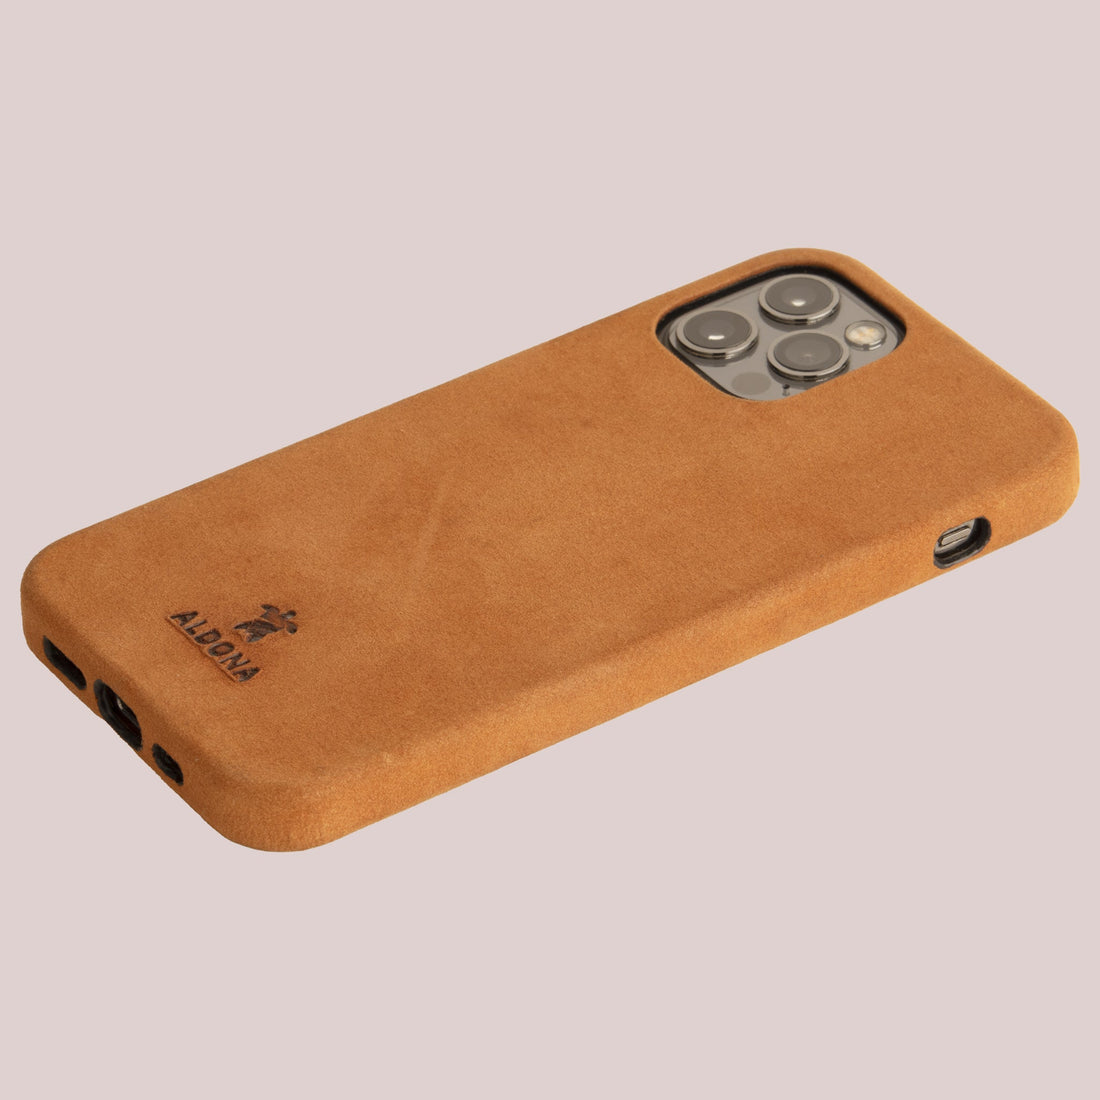 Kalon Case for iPhone 12 Pro with MagSafe Compatibility - Vintage Tan